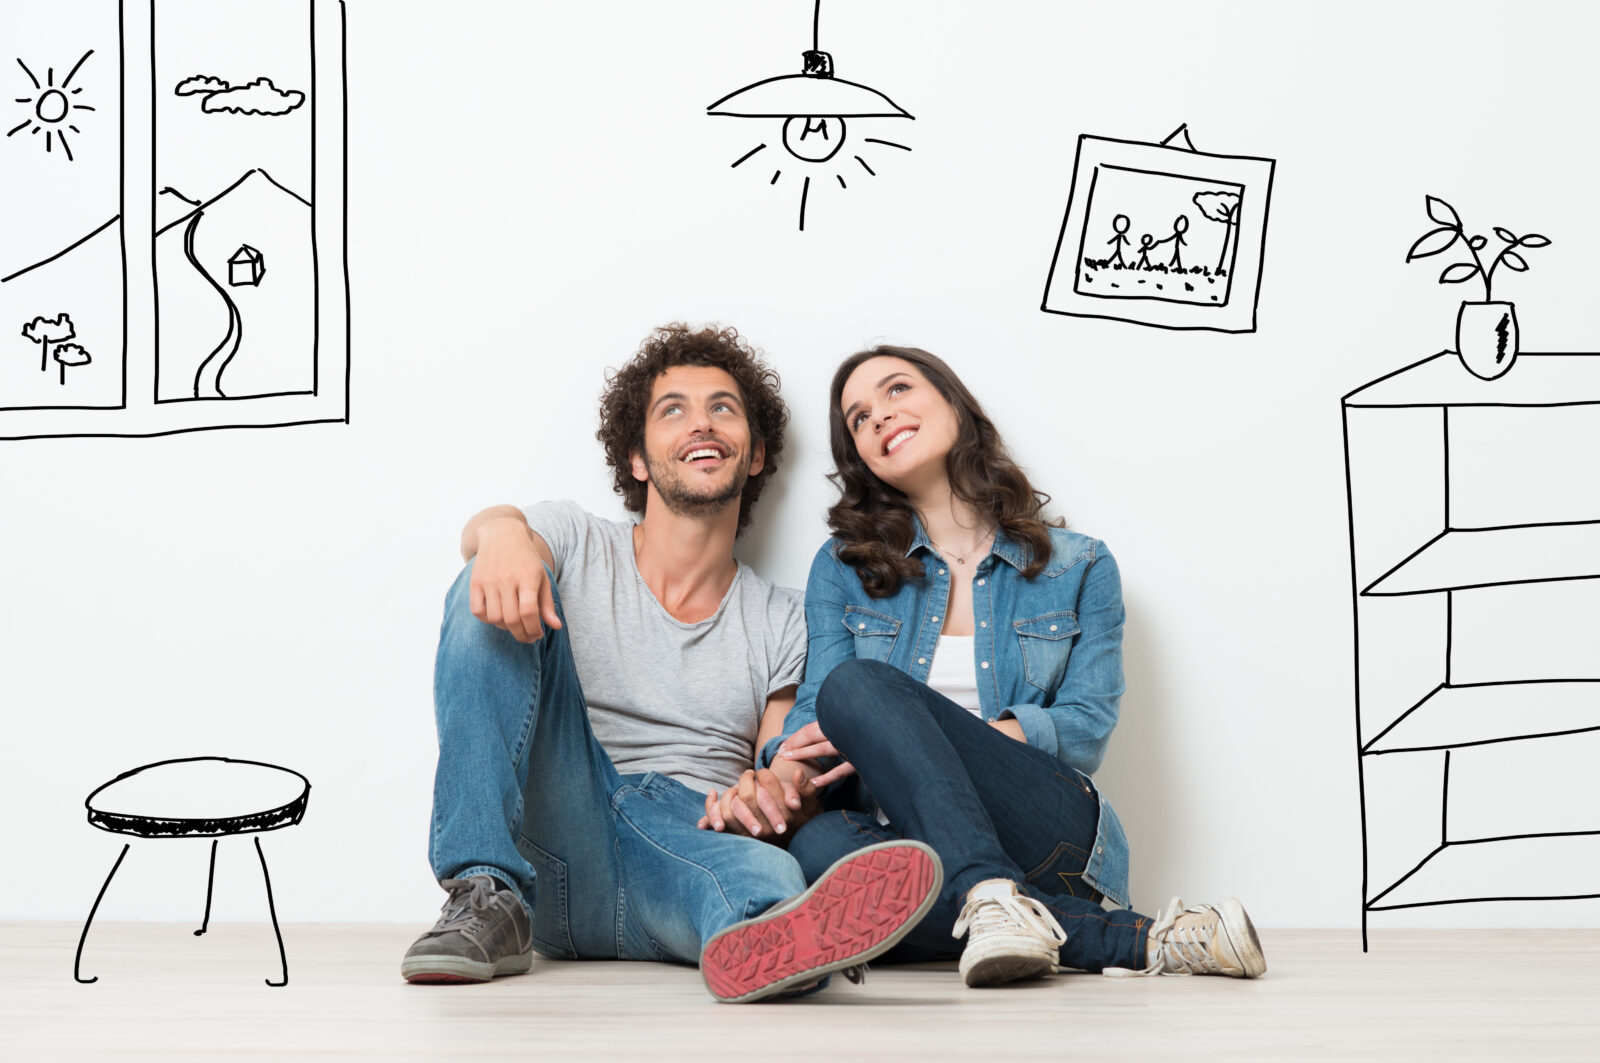 Portrait Of Happy Young Couple Sitting On Floor Looking Up While Dreaming Their New Home And Furnishing 2024/05/AdobeStock_67276977.jpeg 